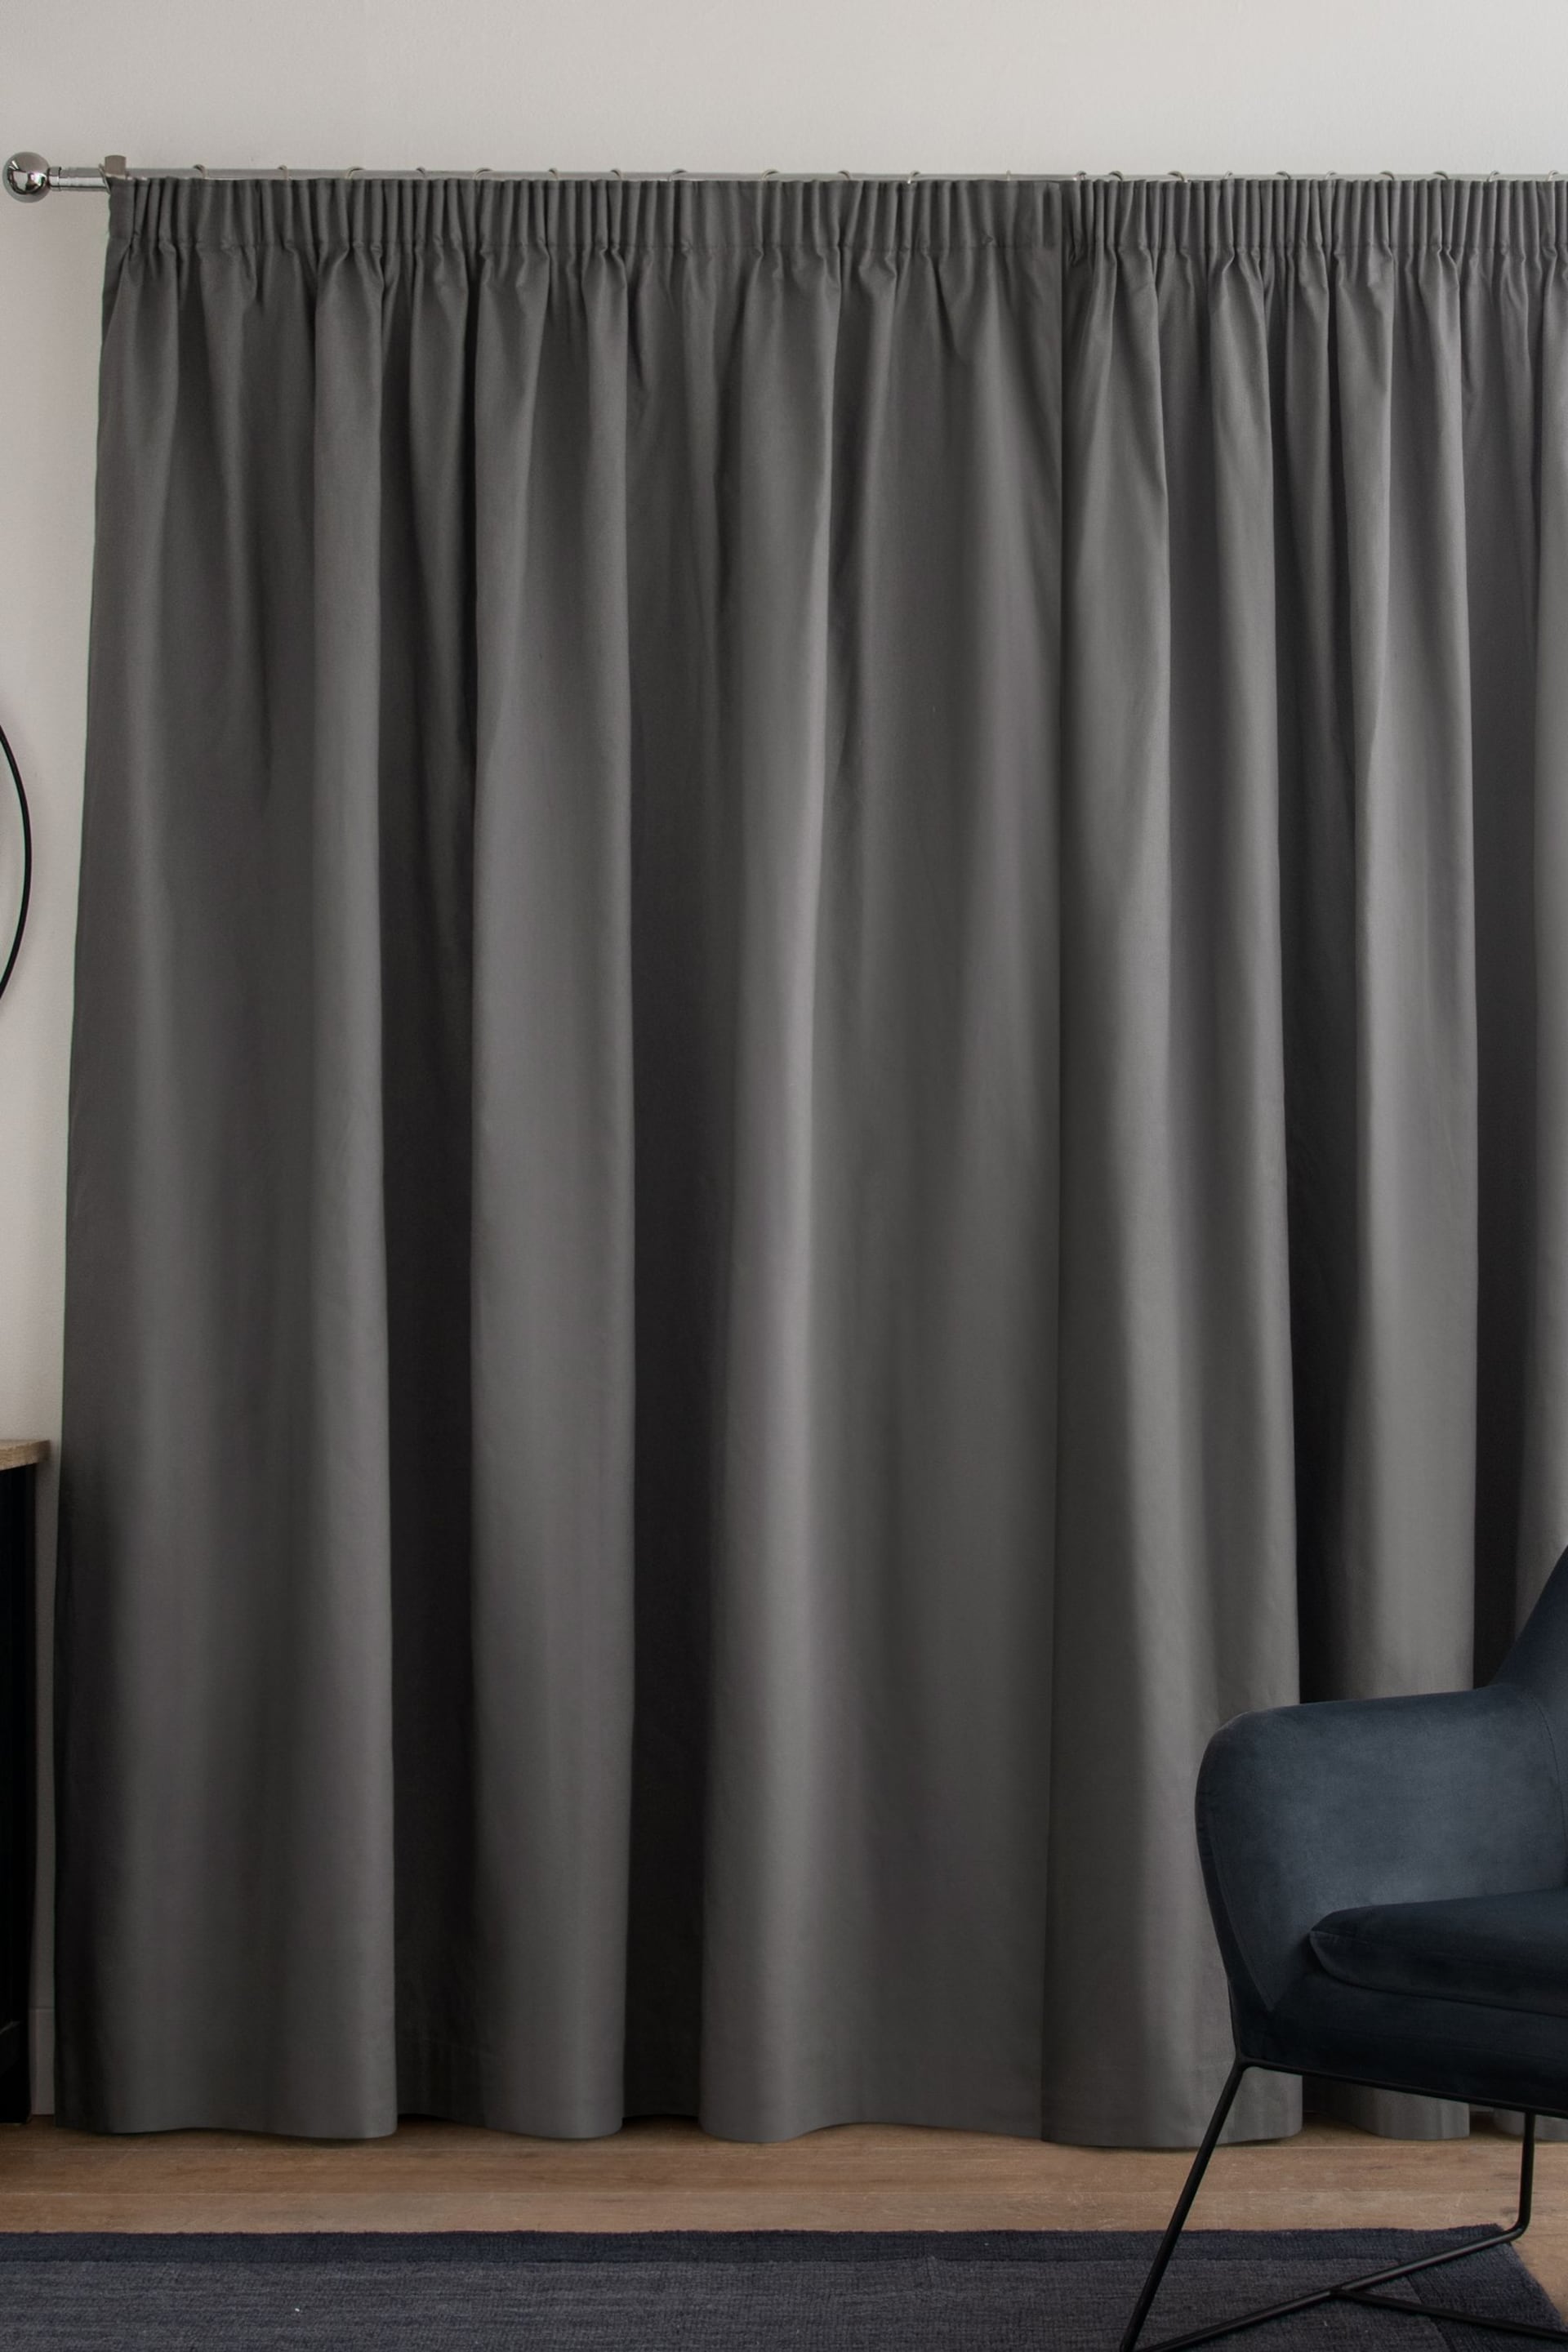 Charcoal Grey Cotton Lined Pencil Pleat Curtains - Image 5 of 7